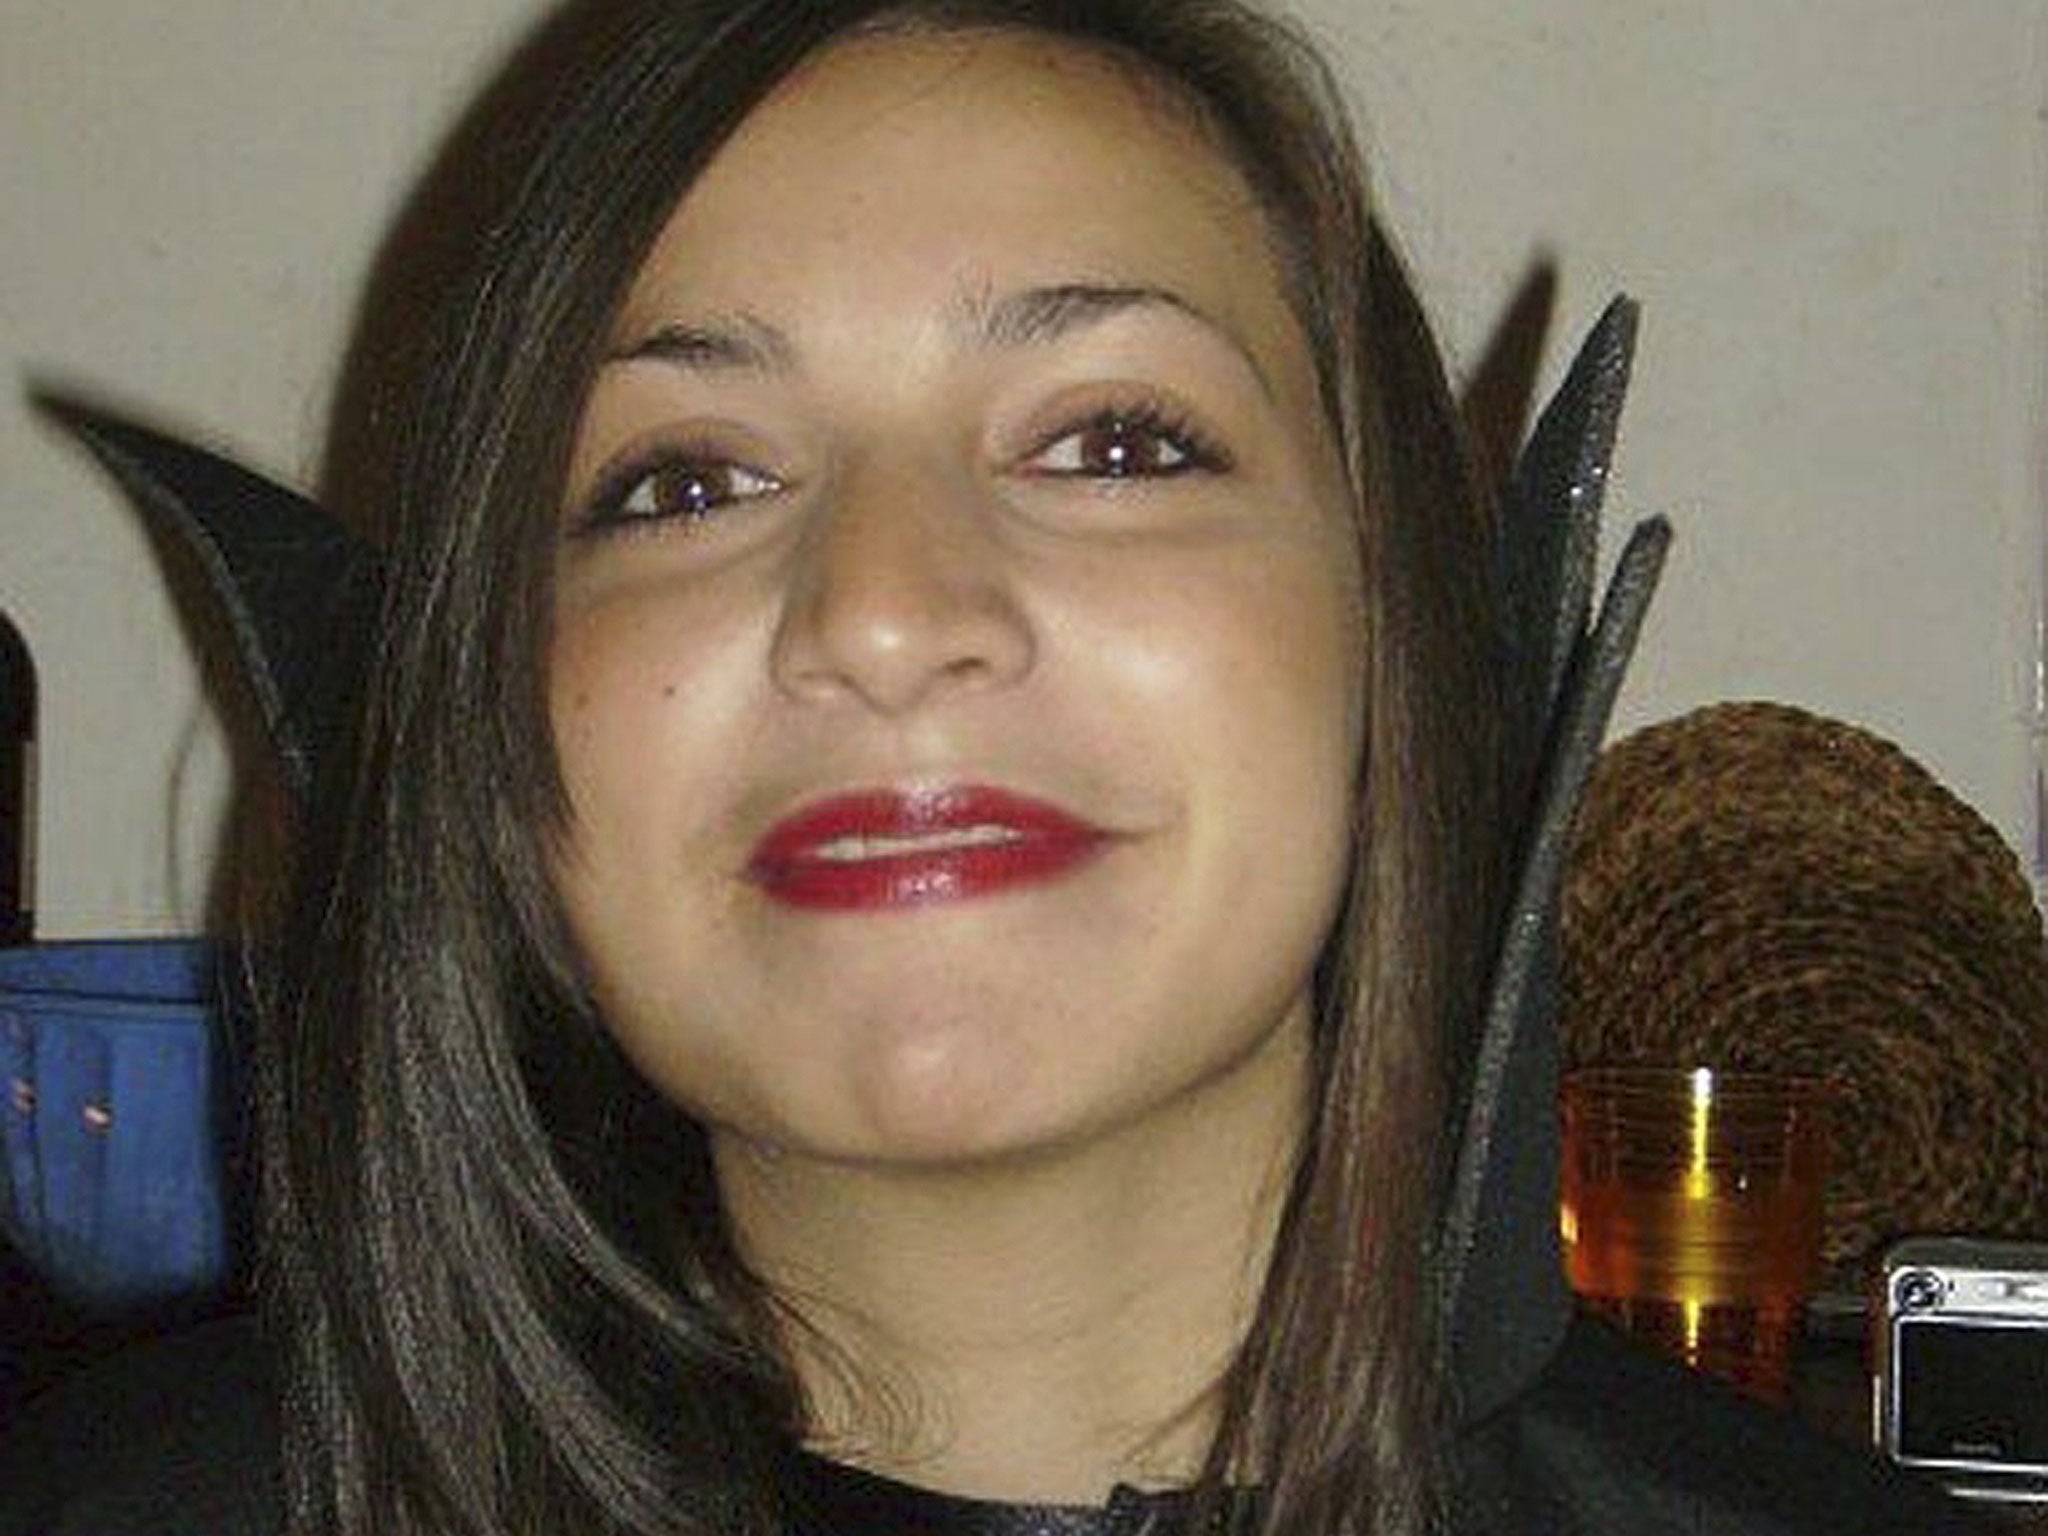 Meredith Kercher, who was murdered in 2007